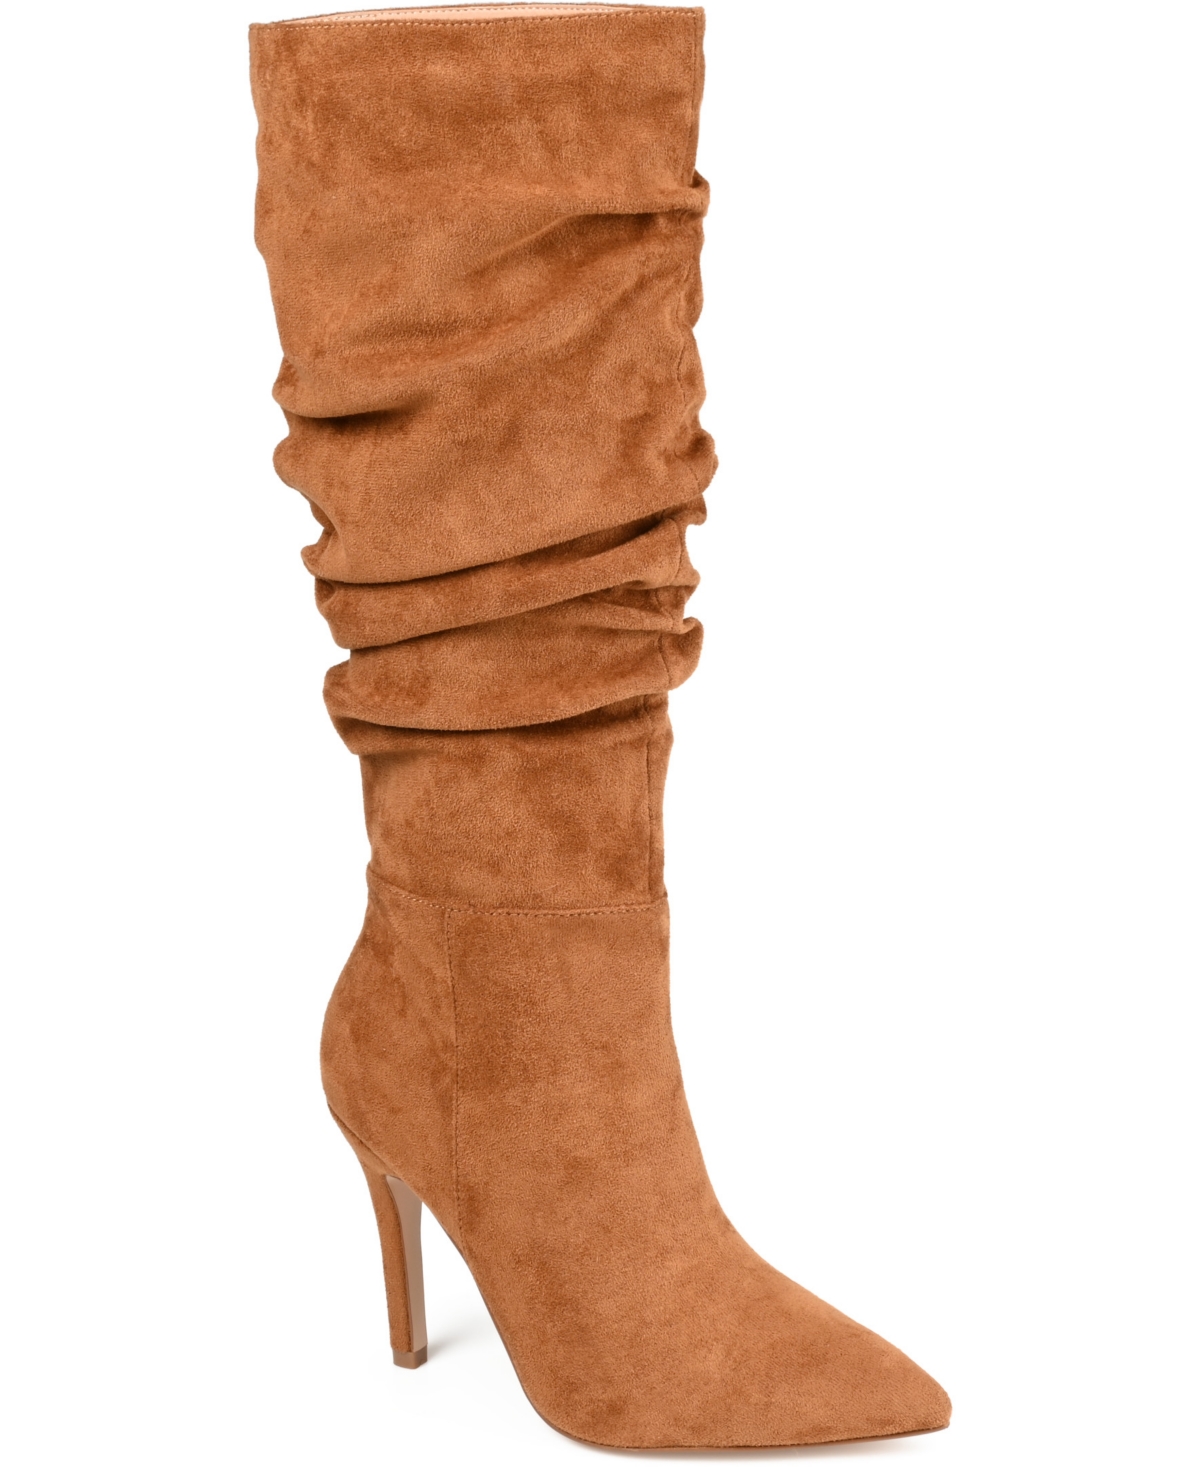 Women's Sarie Ruched Stiletto Boots - Tan